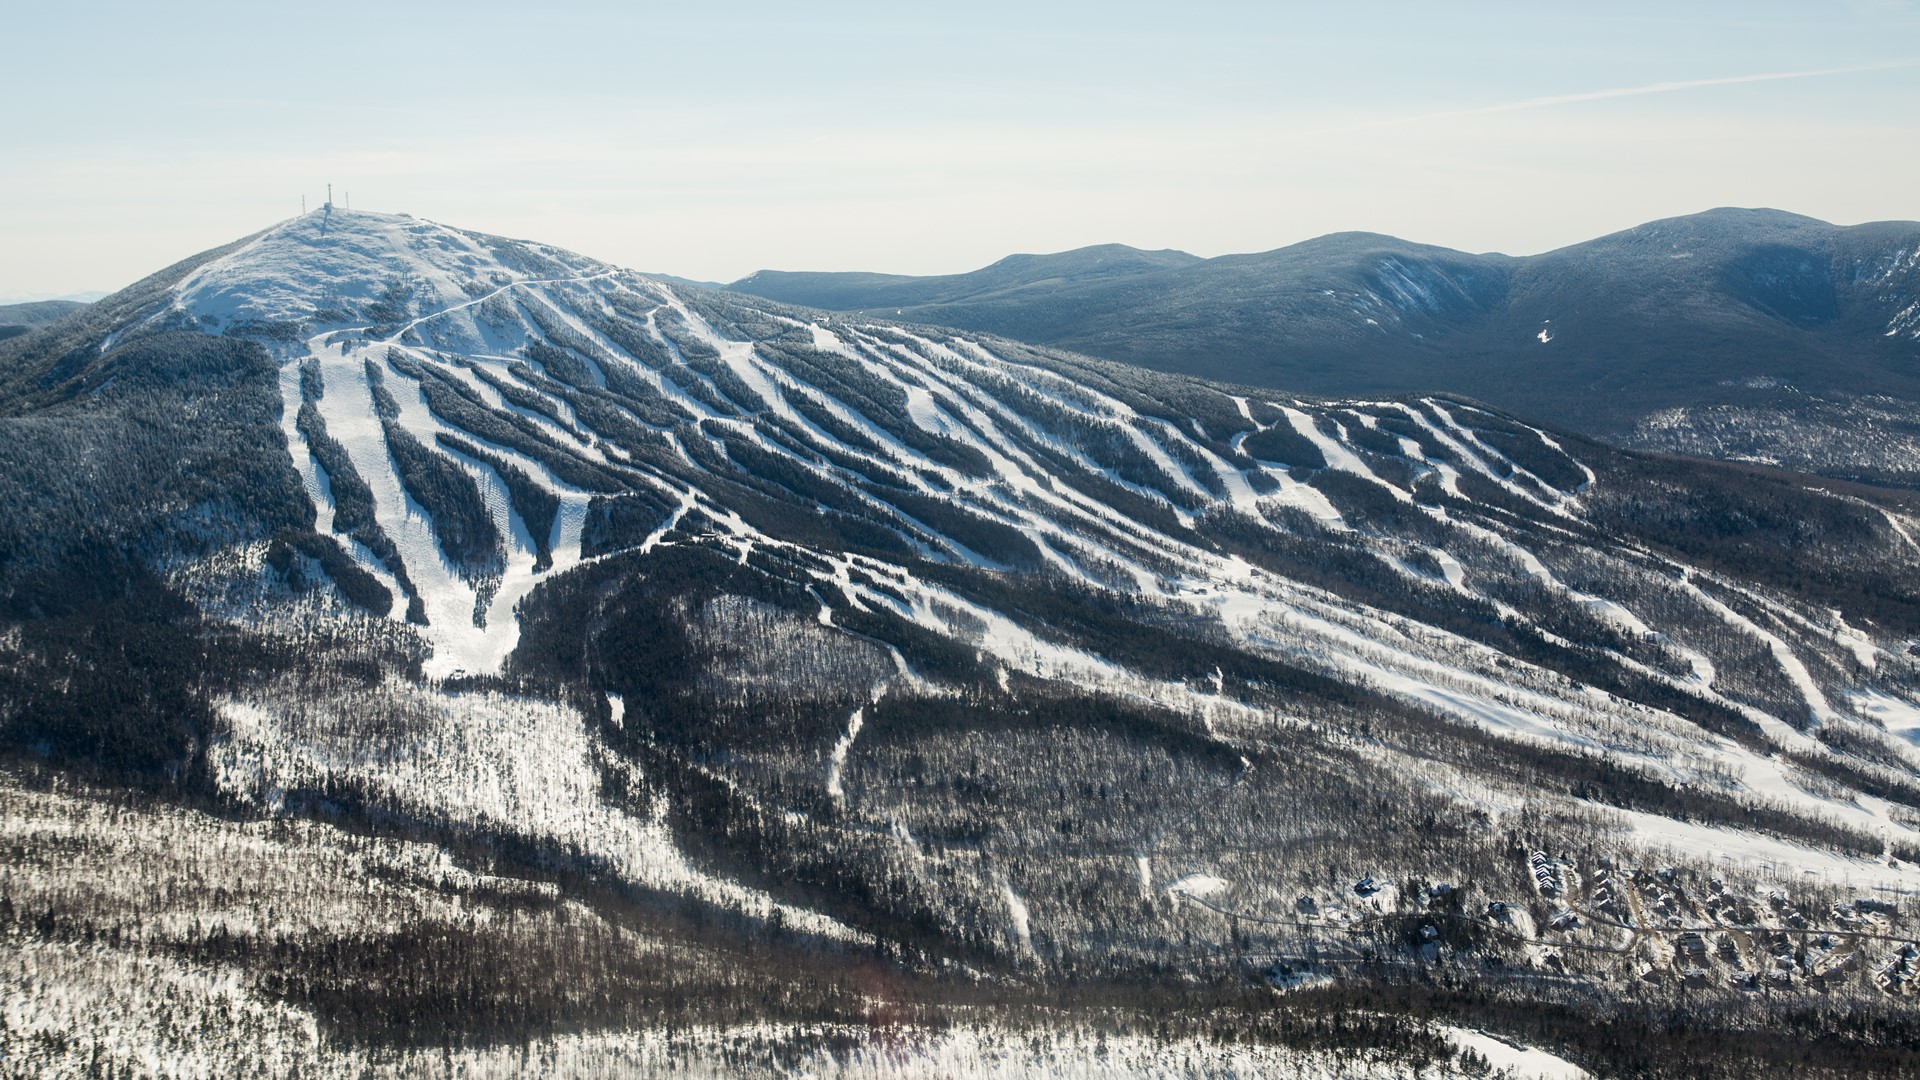 The Department of Environmental Protection approved the 550-acre project for Sugarloaf's west mountain, which is part of a wider plan to revamp the resort by 2030.